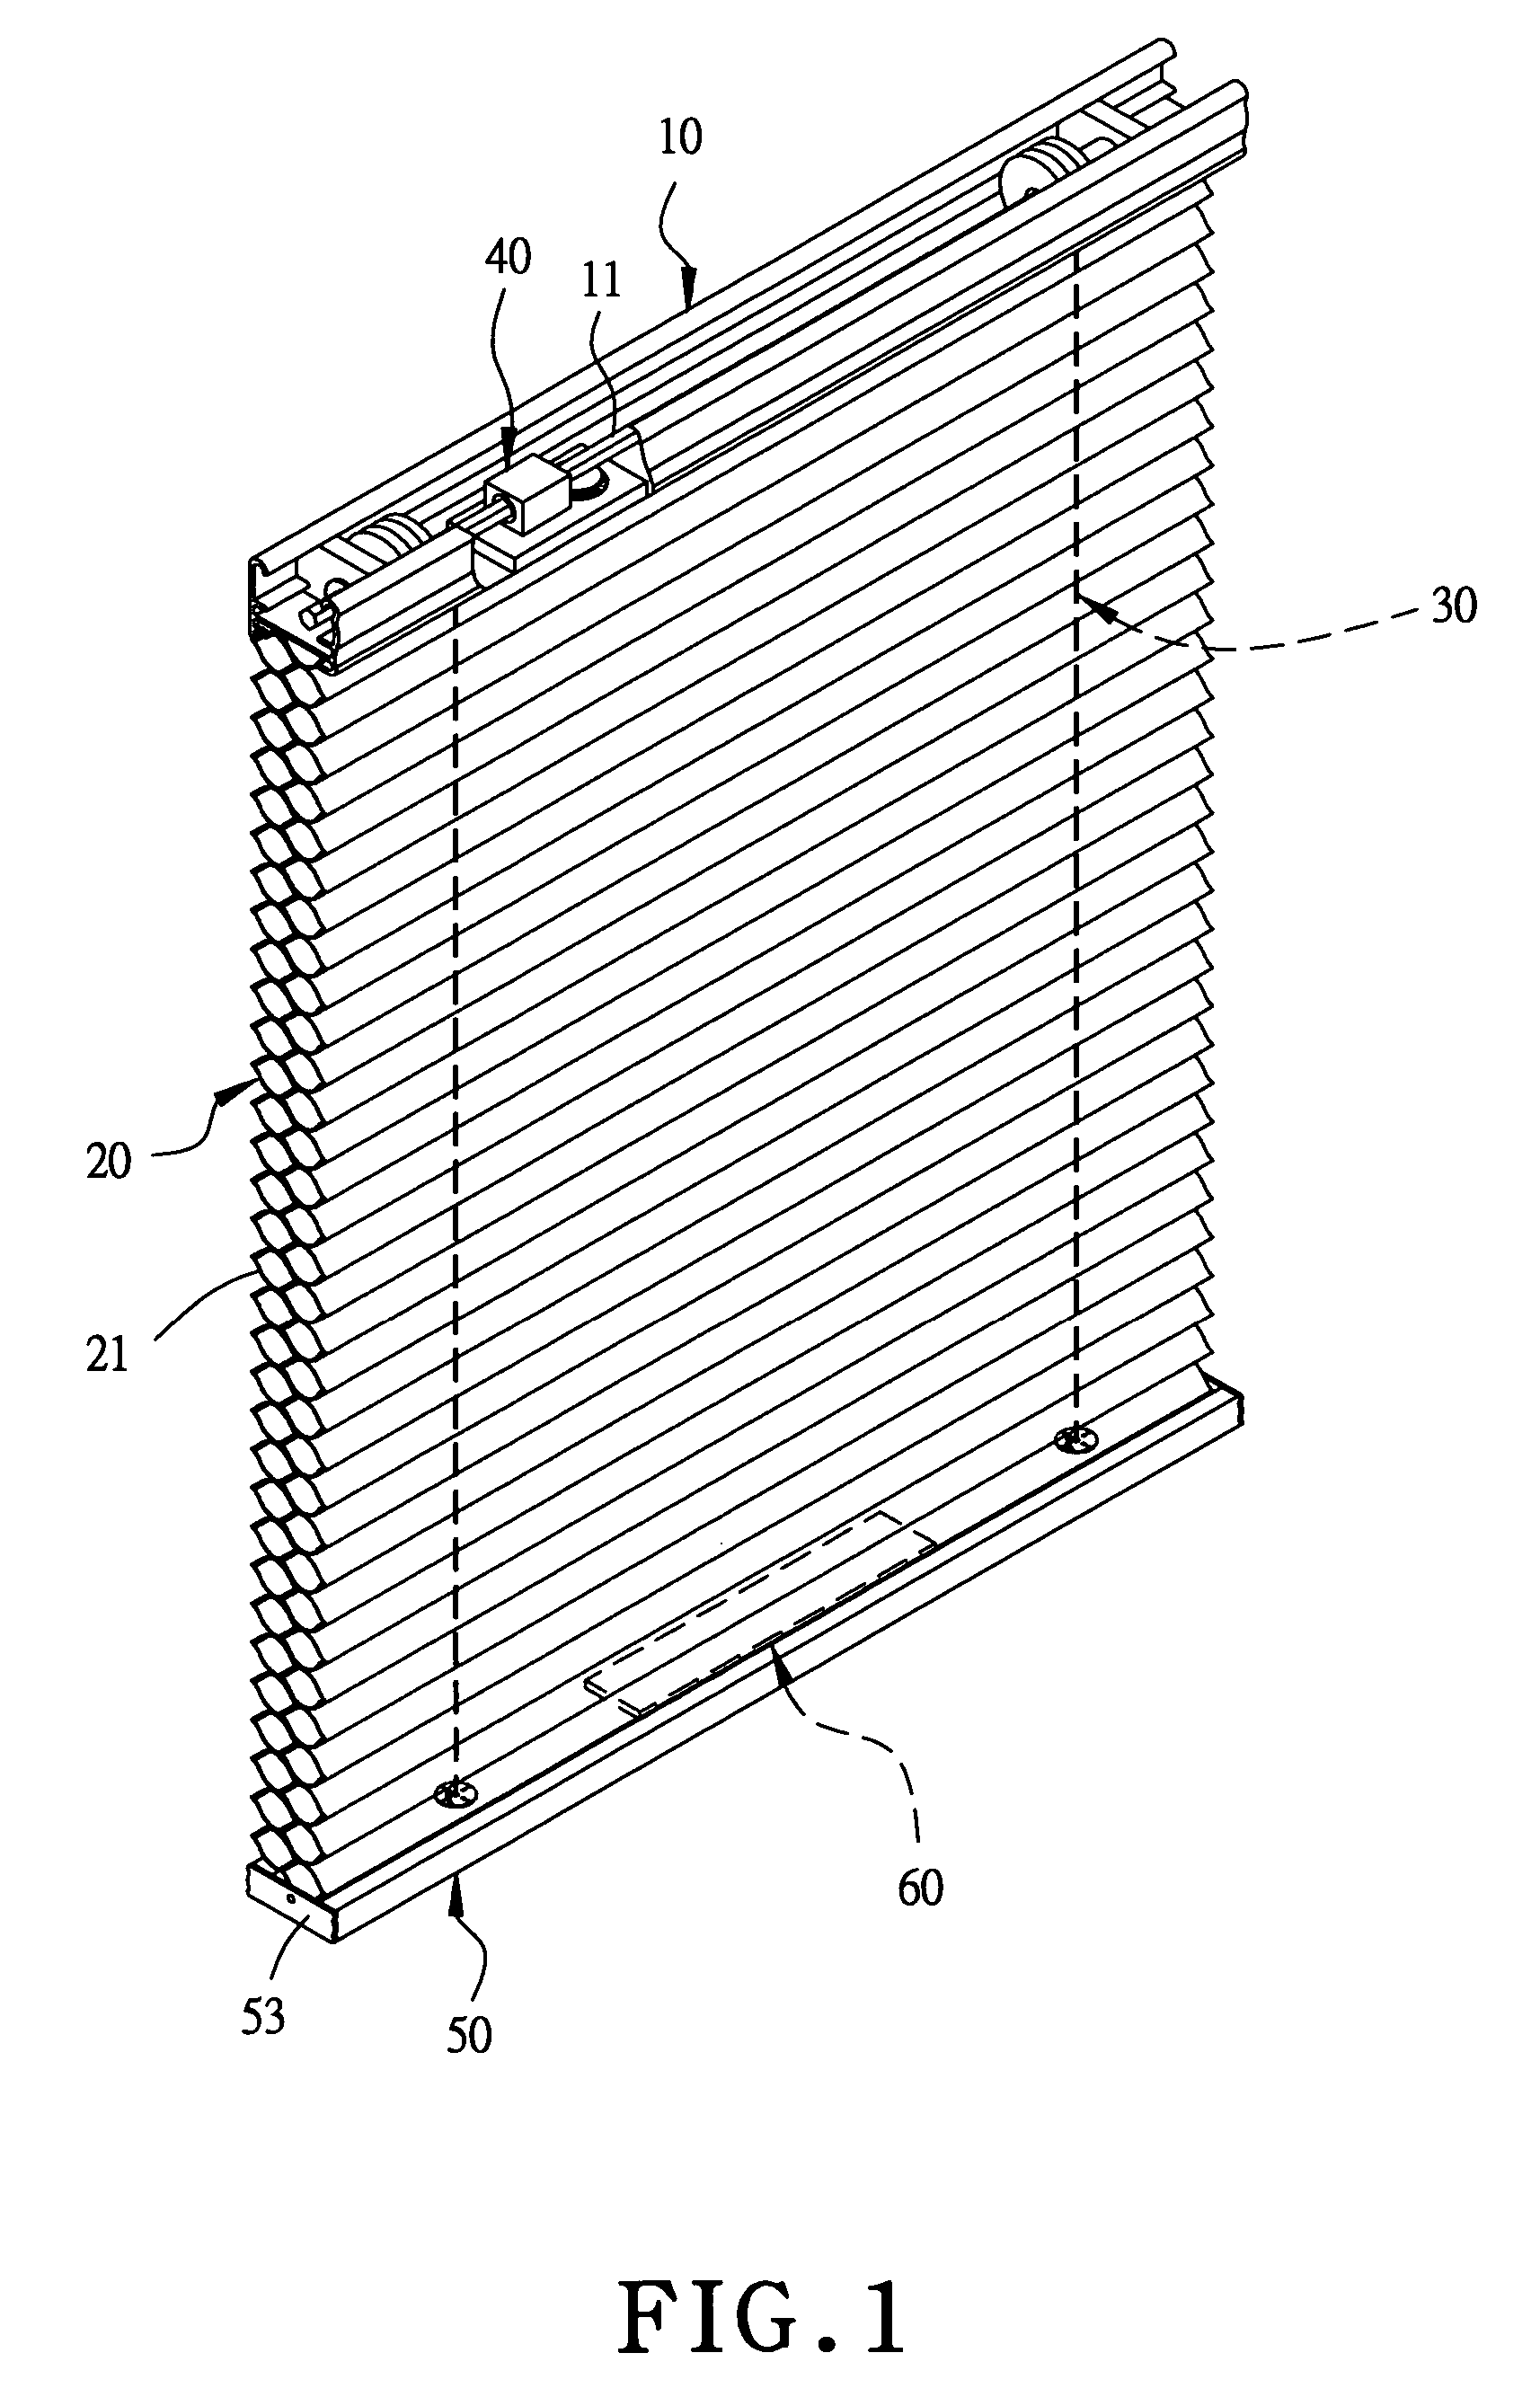 Equilibrium device for a blind without pull cords